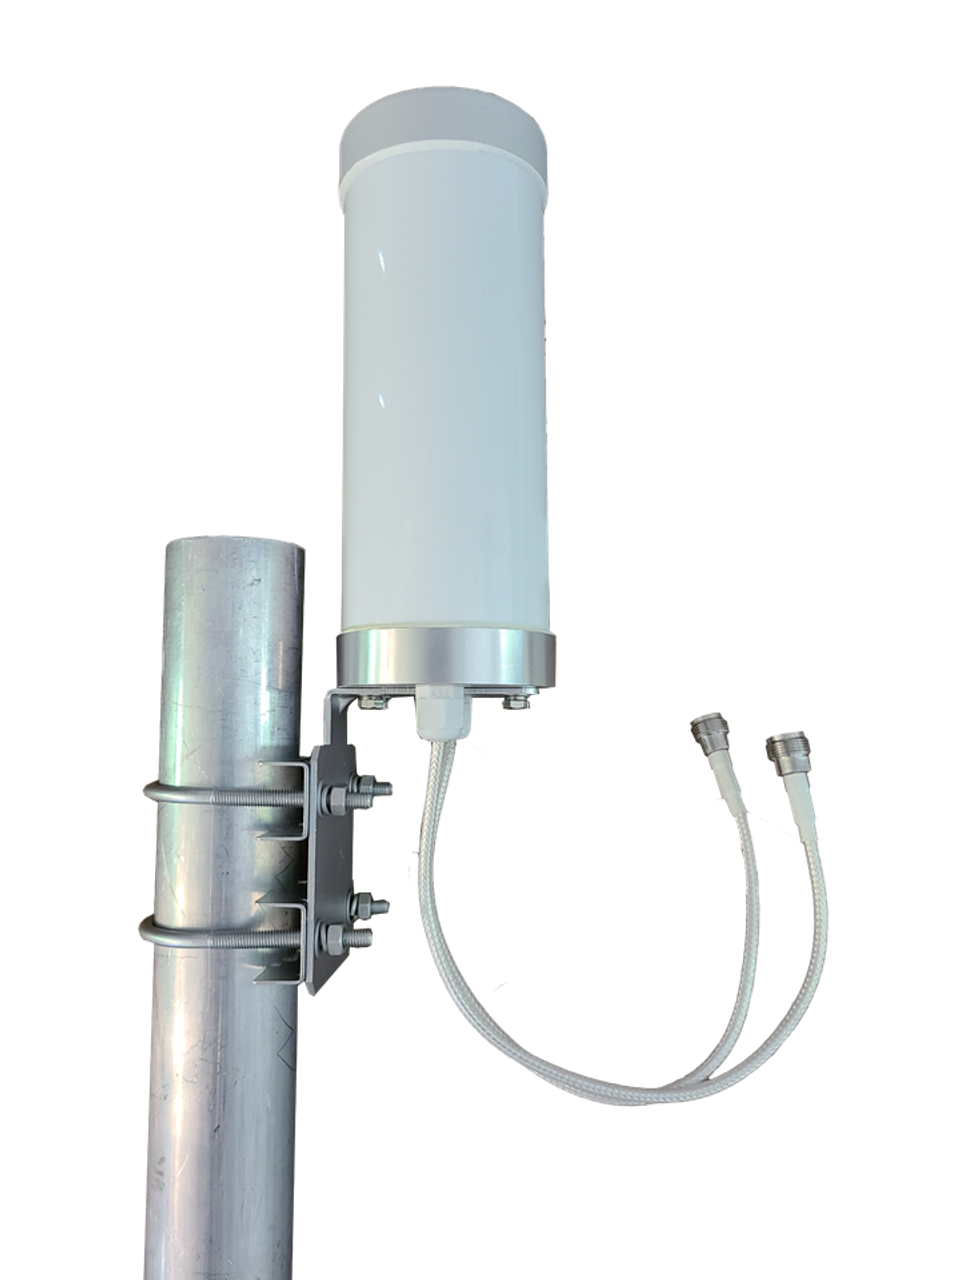 BEC MX-1200 - M29 MIMO Omni Directional Cellular 3G 4G 5G LTE Band 71 External Data M2M IoT Antenna - 2x NF - Pole Mount